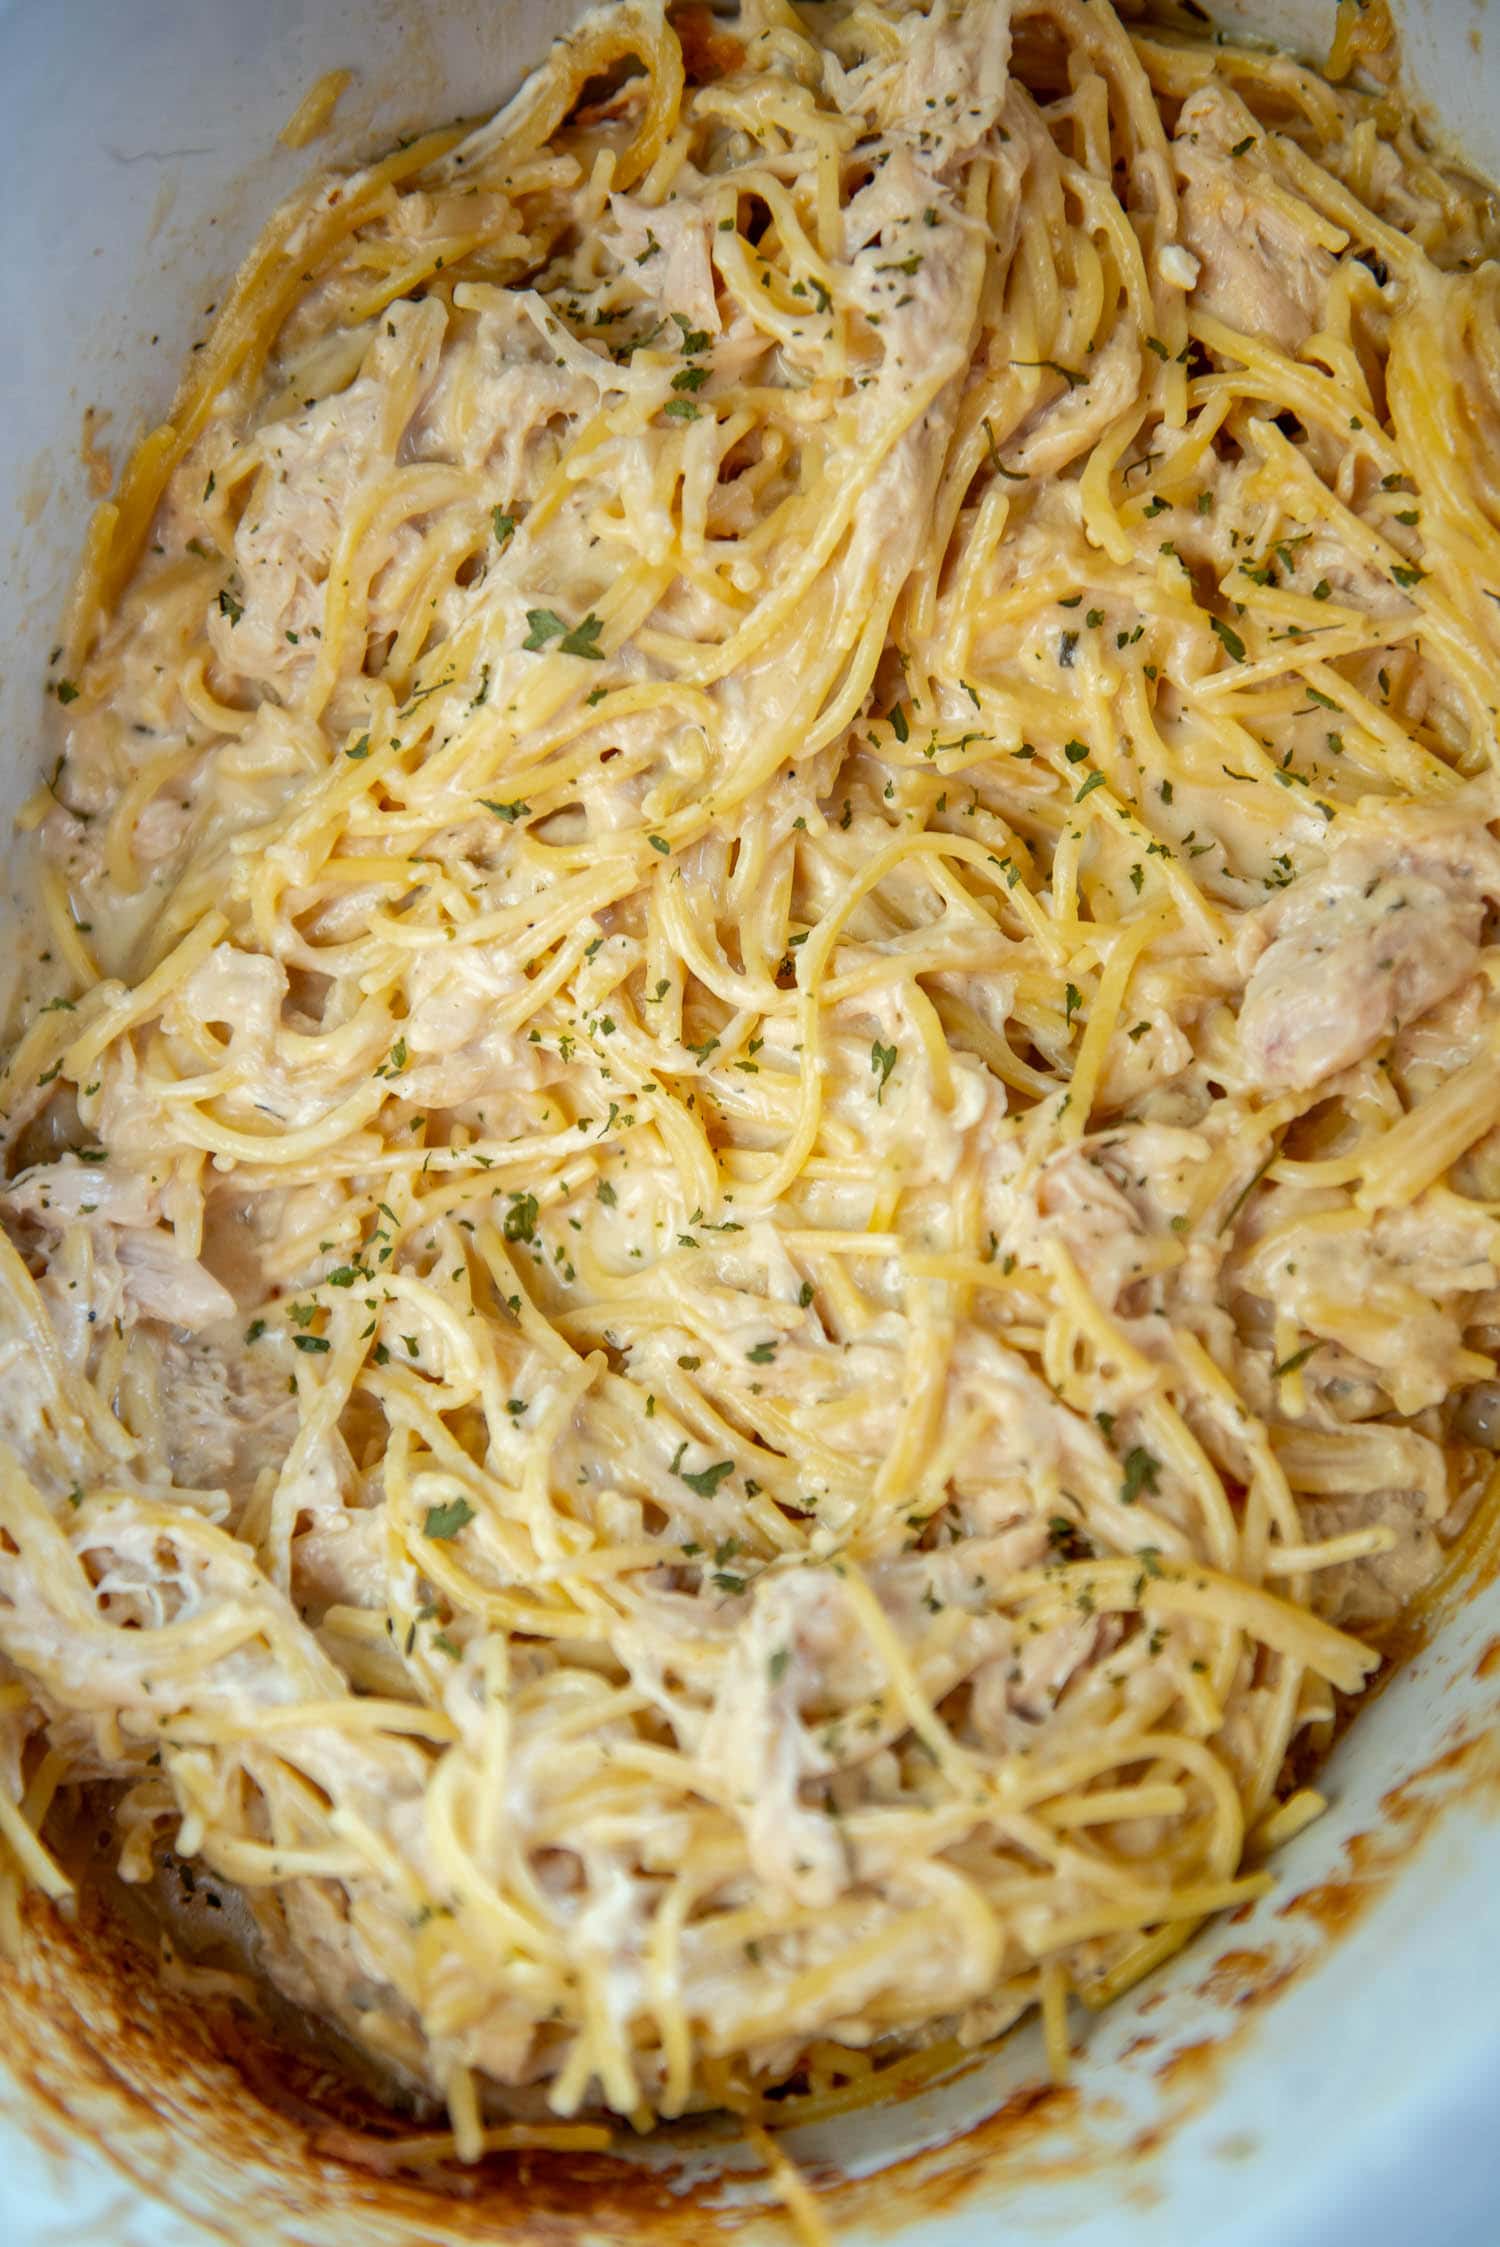 Cooked spaghetti mixed with white sauce, cooked chicken, and green garnishing in white slow cooker bowl